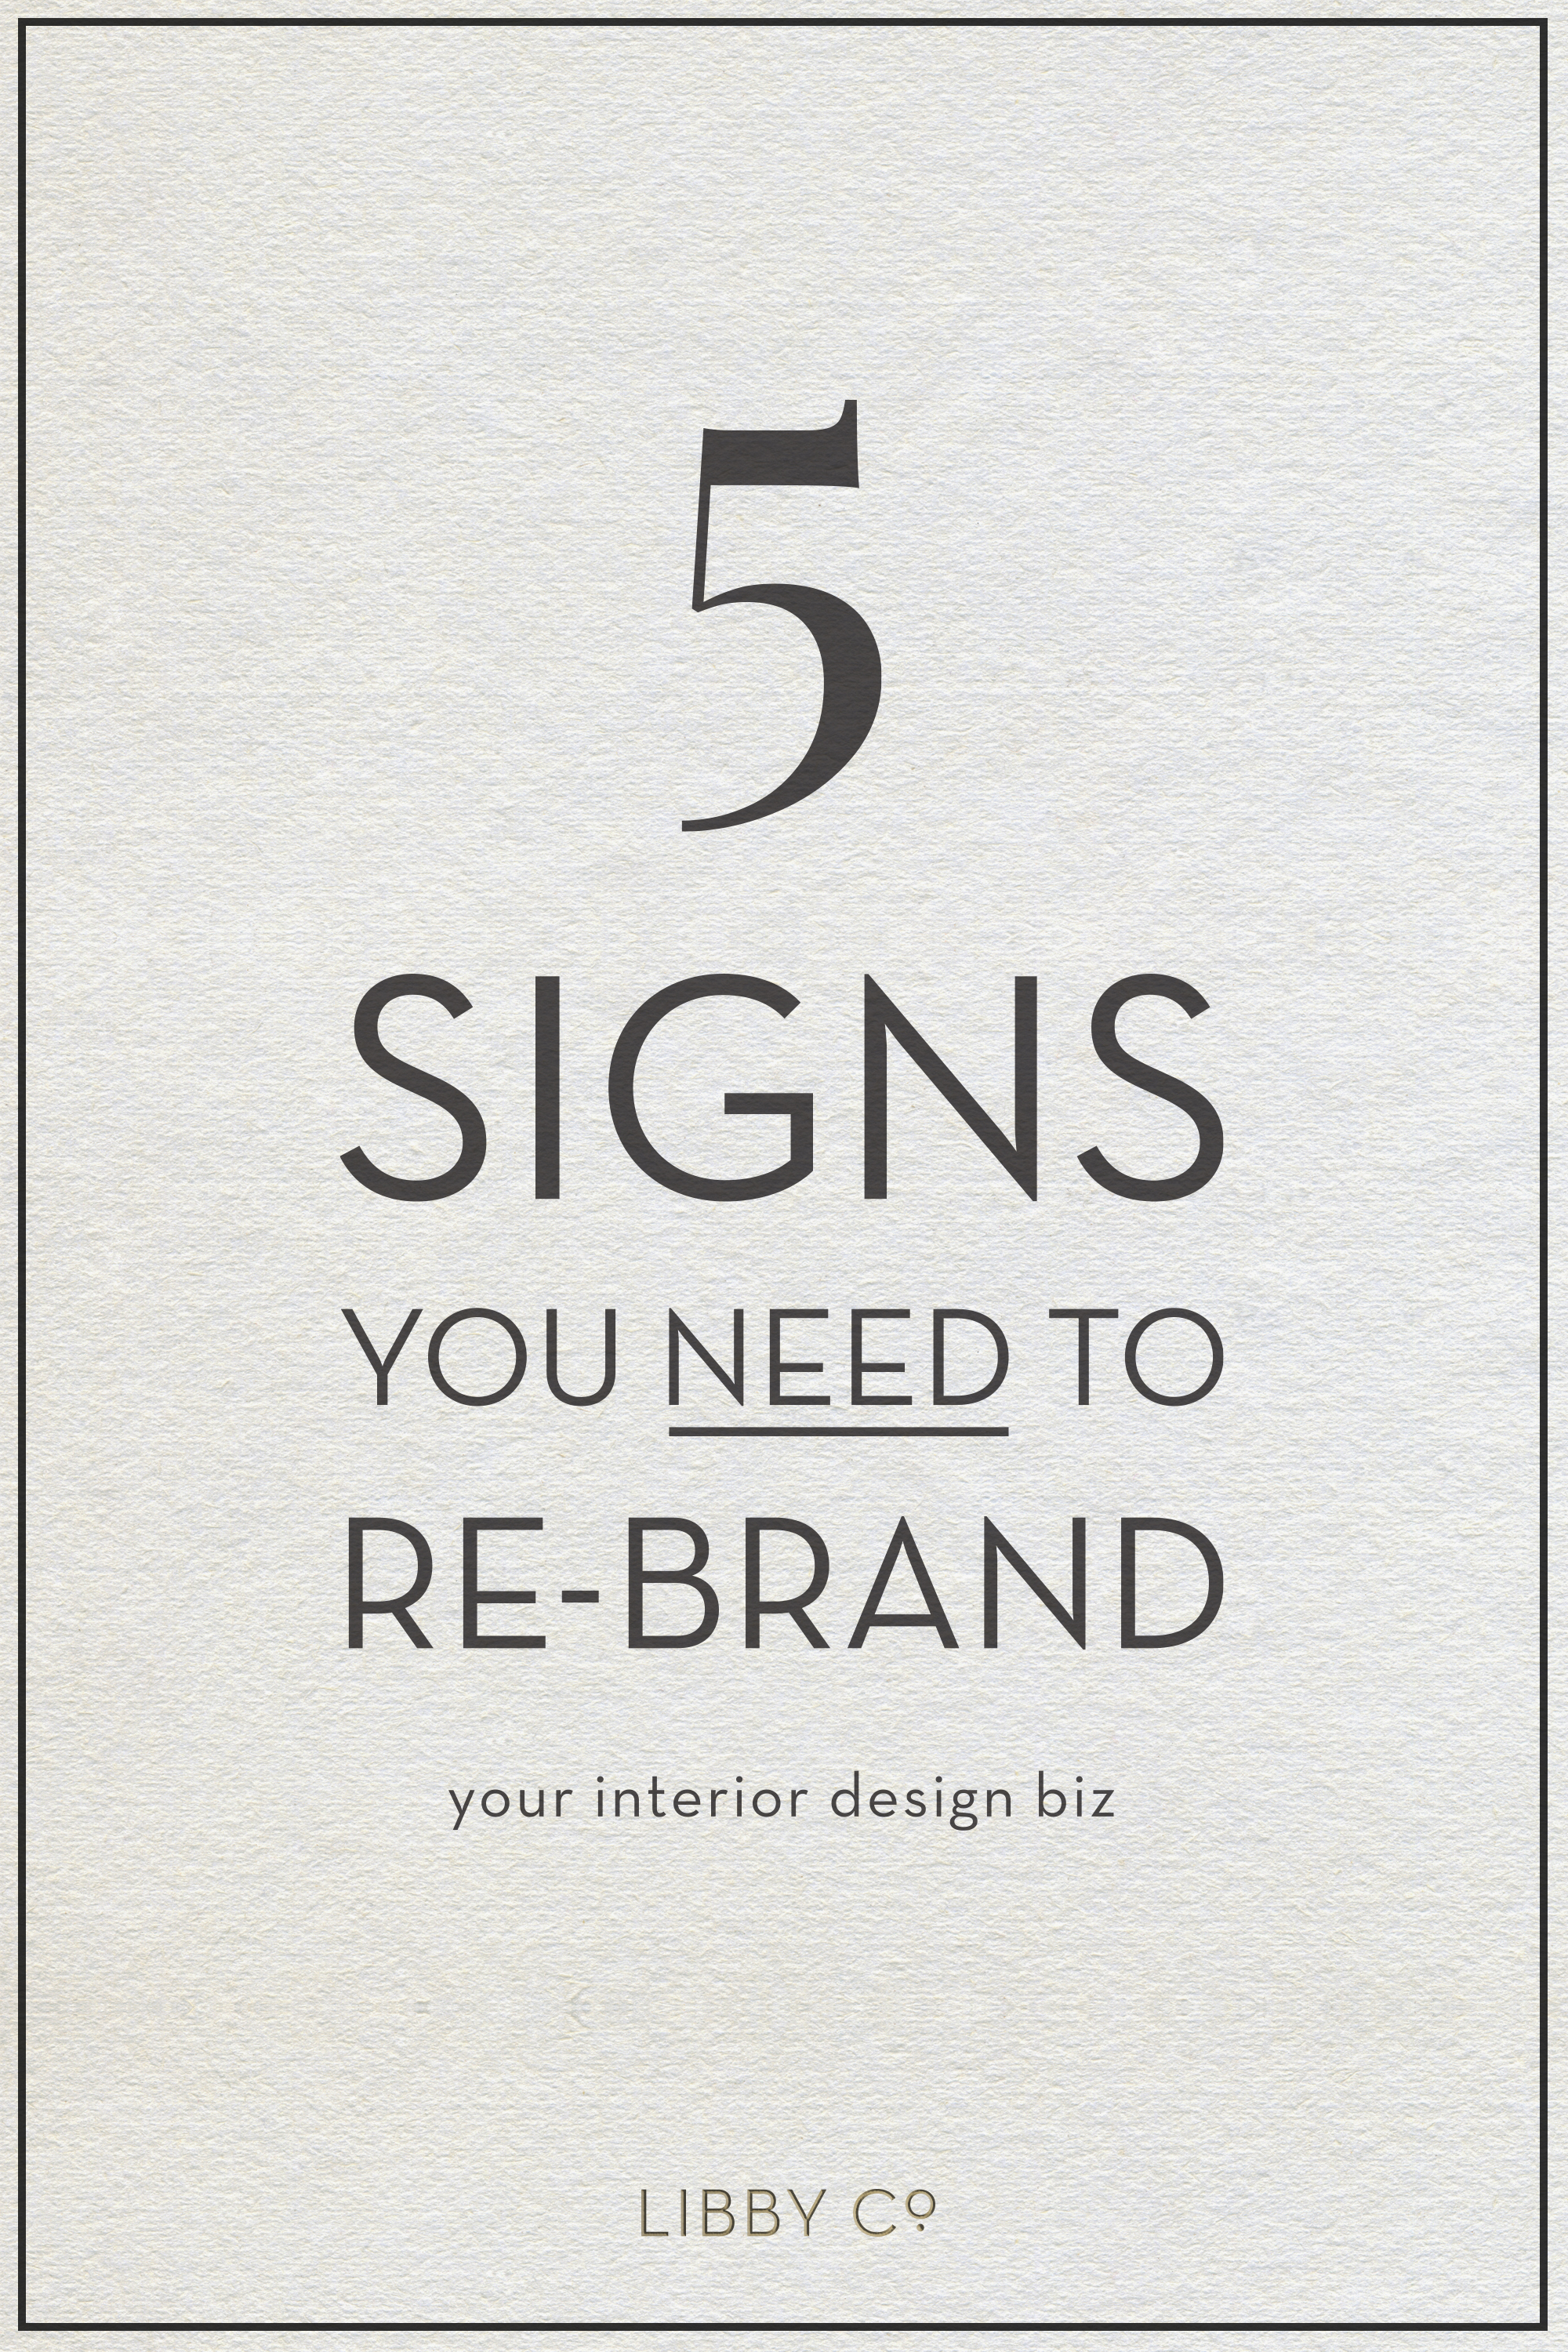 5 Signs You Need to Re-brand. CLICK HERE TO LEARN.